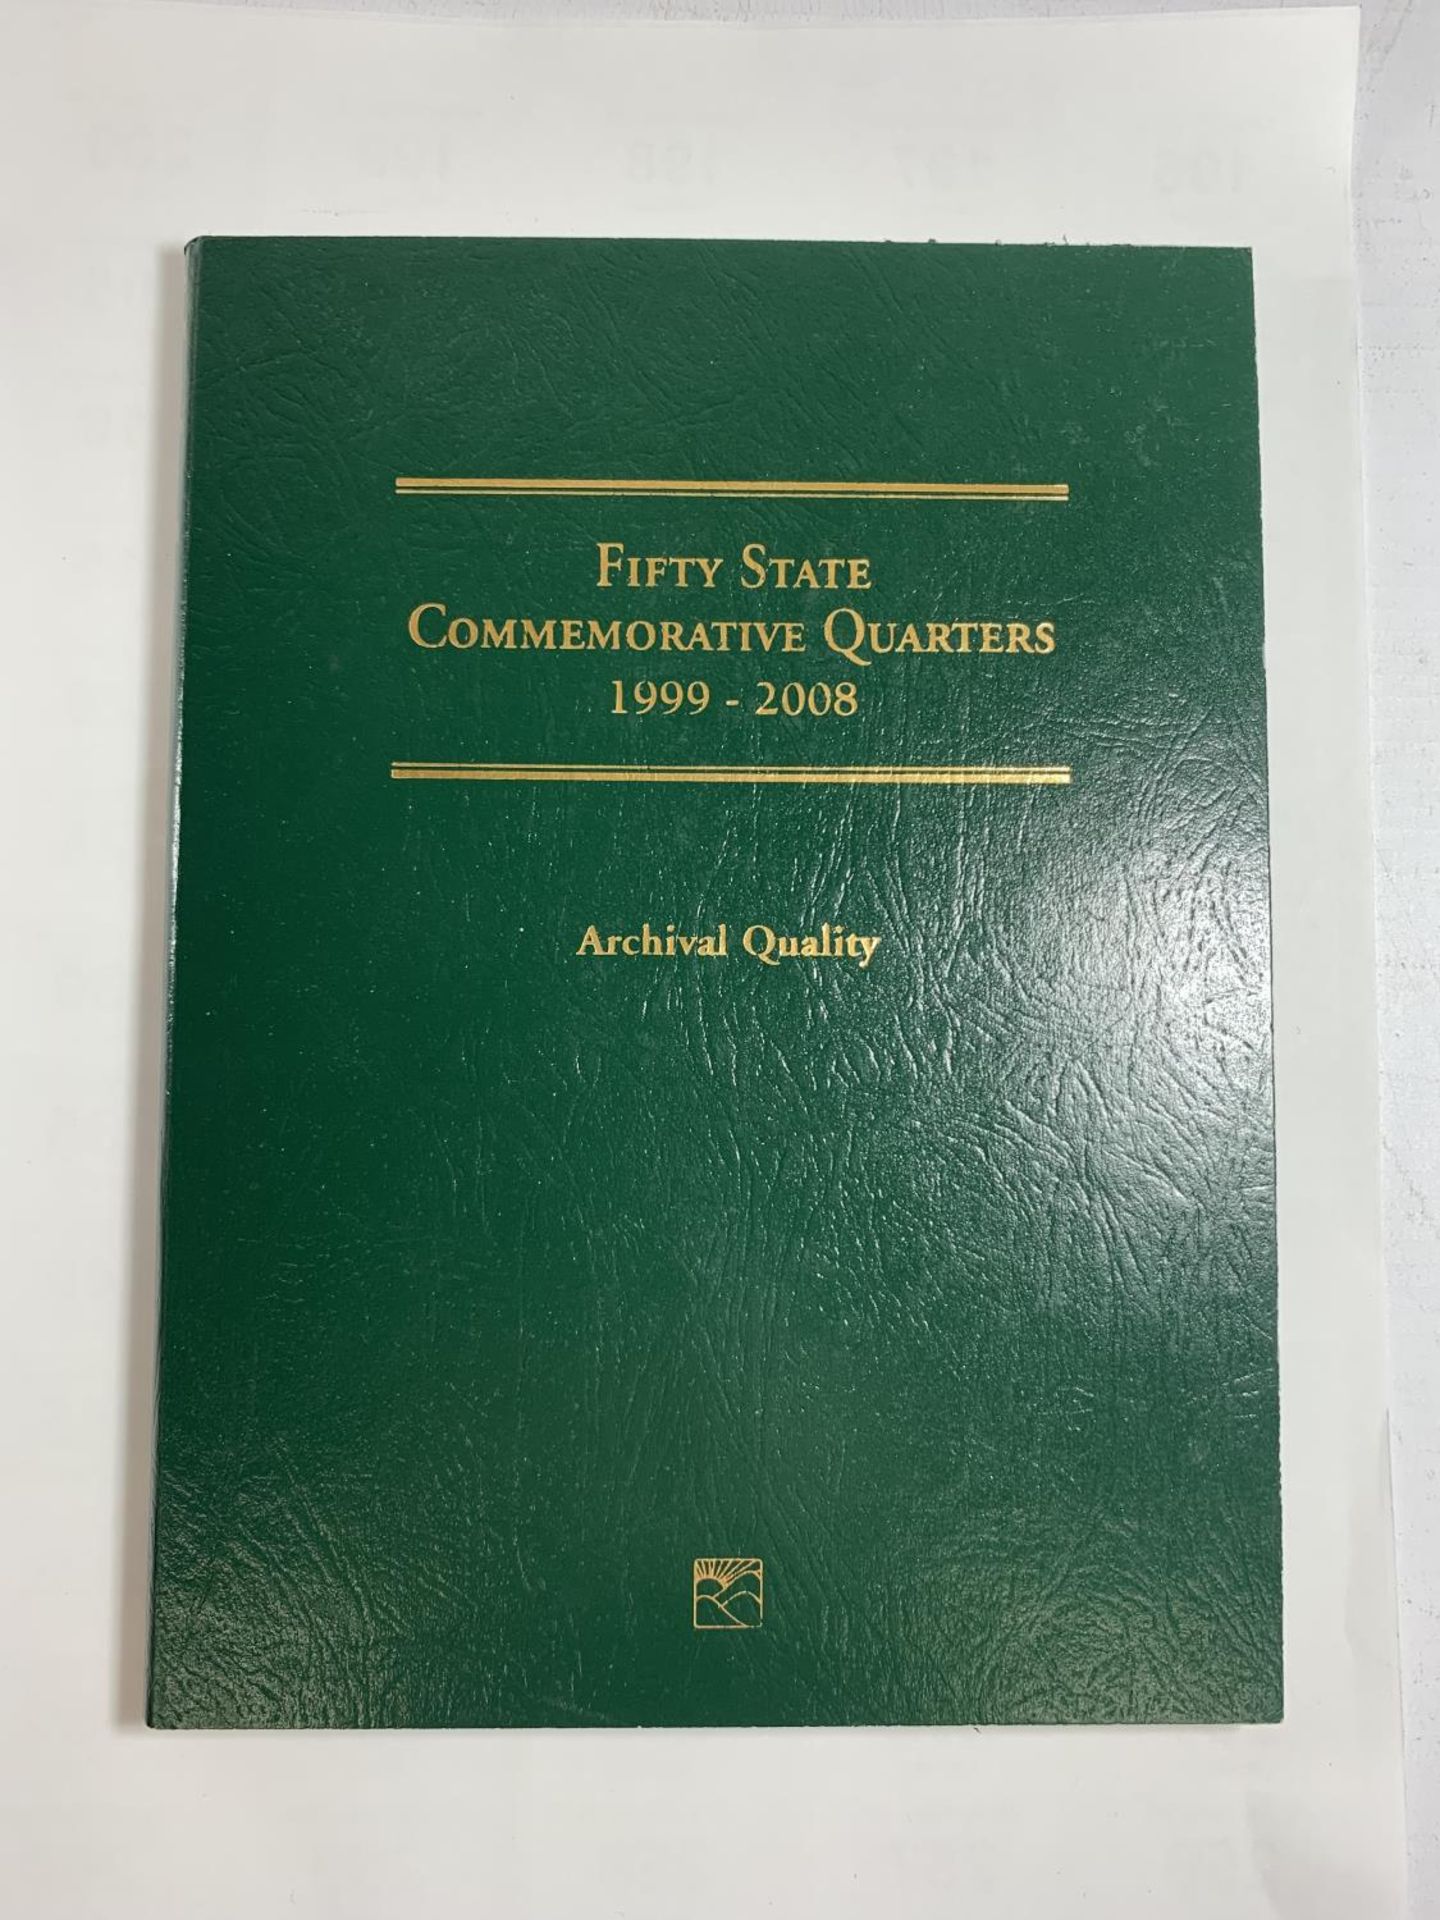 THE FIFTY STATE COMMEMORATIVE QUATERS 1999 - 2008